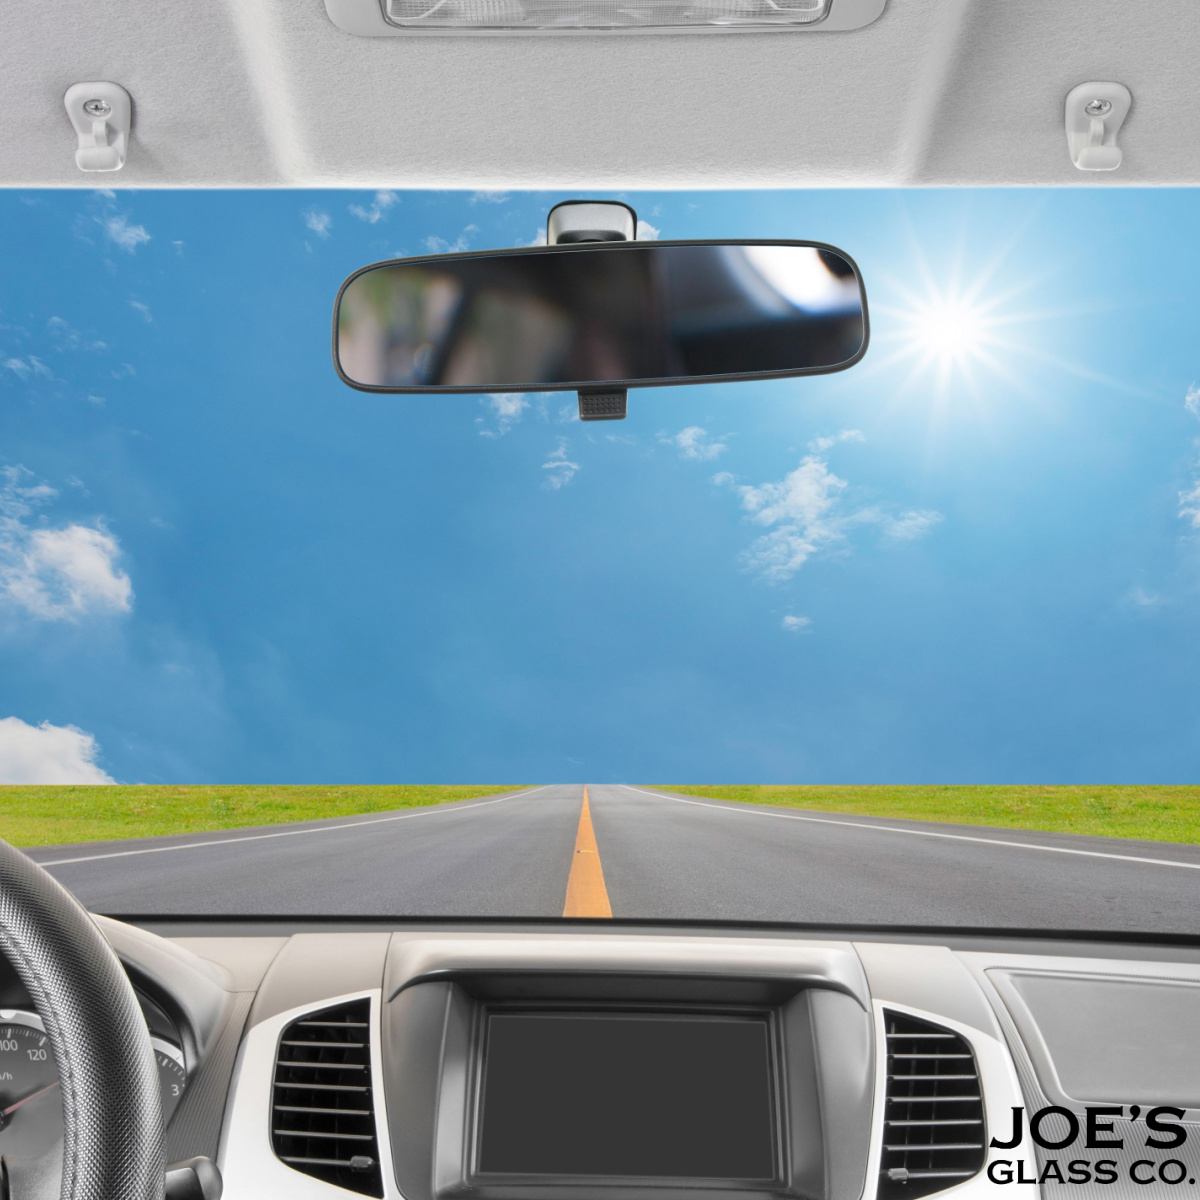 Replace Your Auto Rearview Mirror Glass with Confident Professional Help